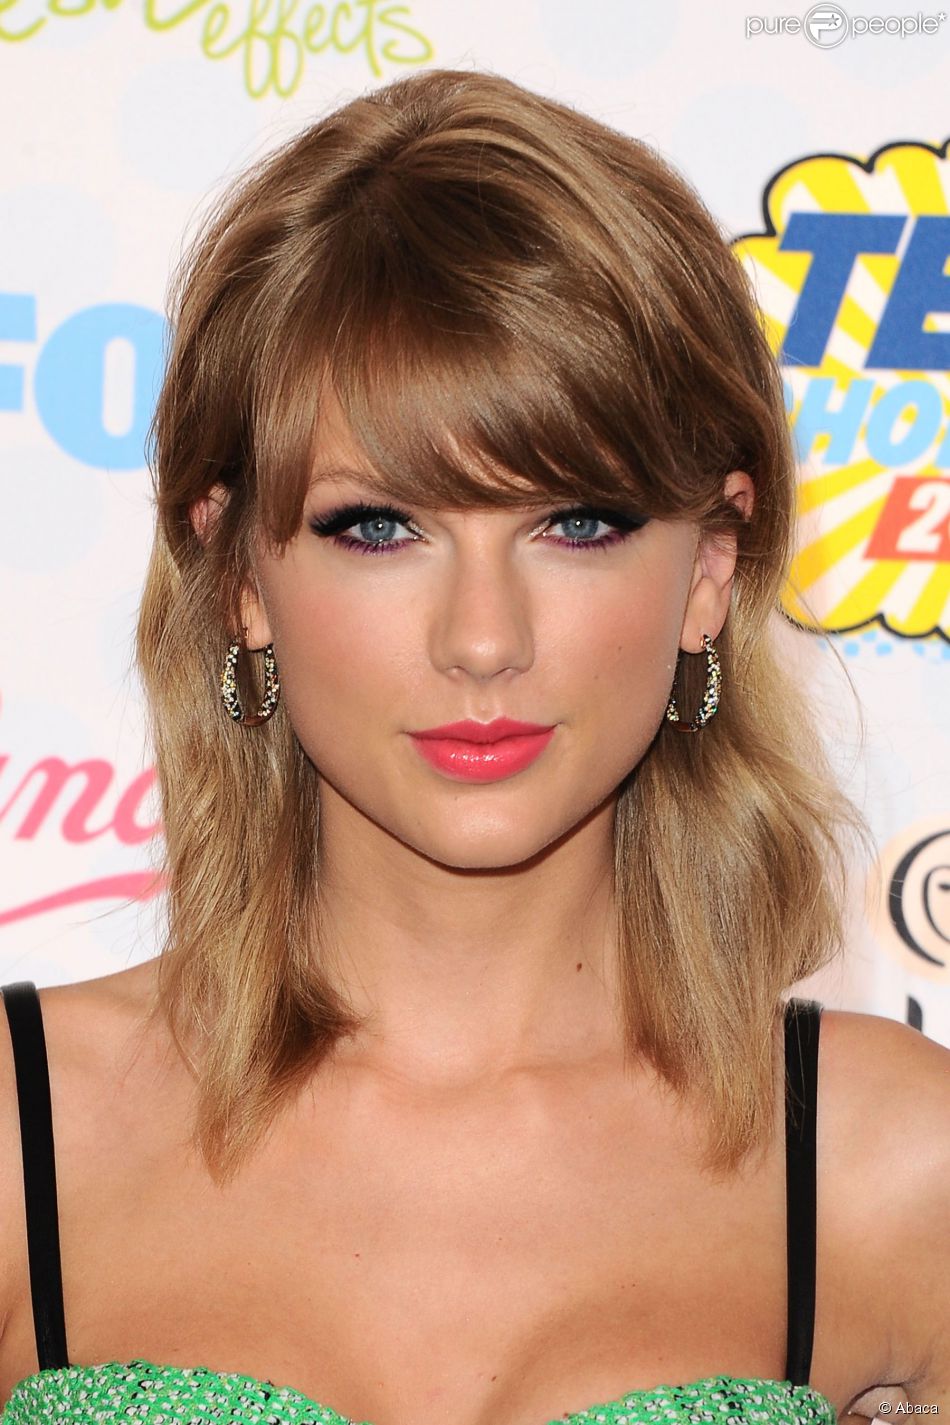 Taylor Swift at the Teen Choice Awards held at the Shrine Auditorium in Los Angeles, CA, USA, August 10, 2014. Photo by Kyle Rover/Startraks/ABACAPRESS.COM11/08/2014 - Los Angeles